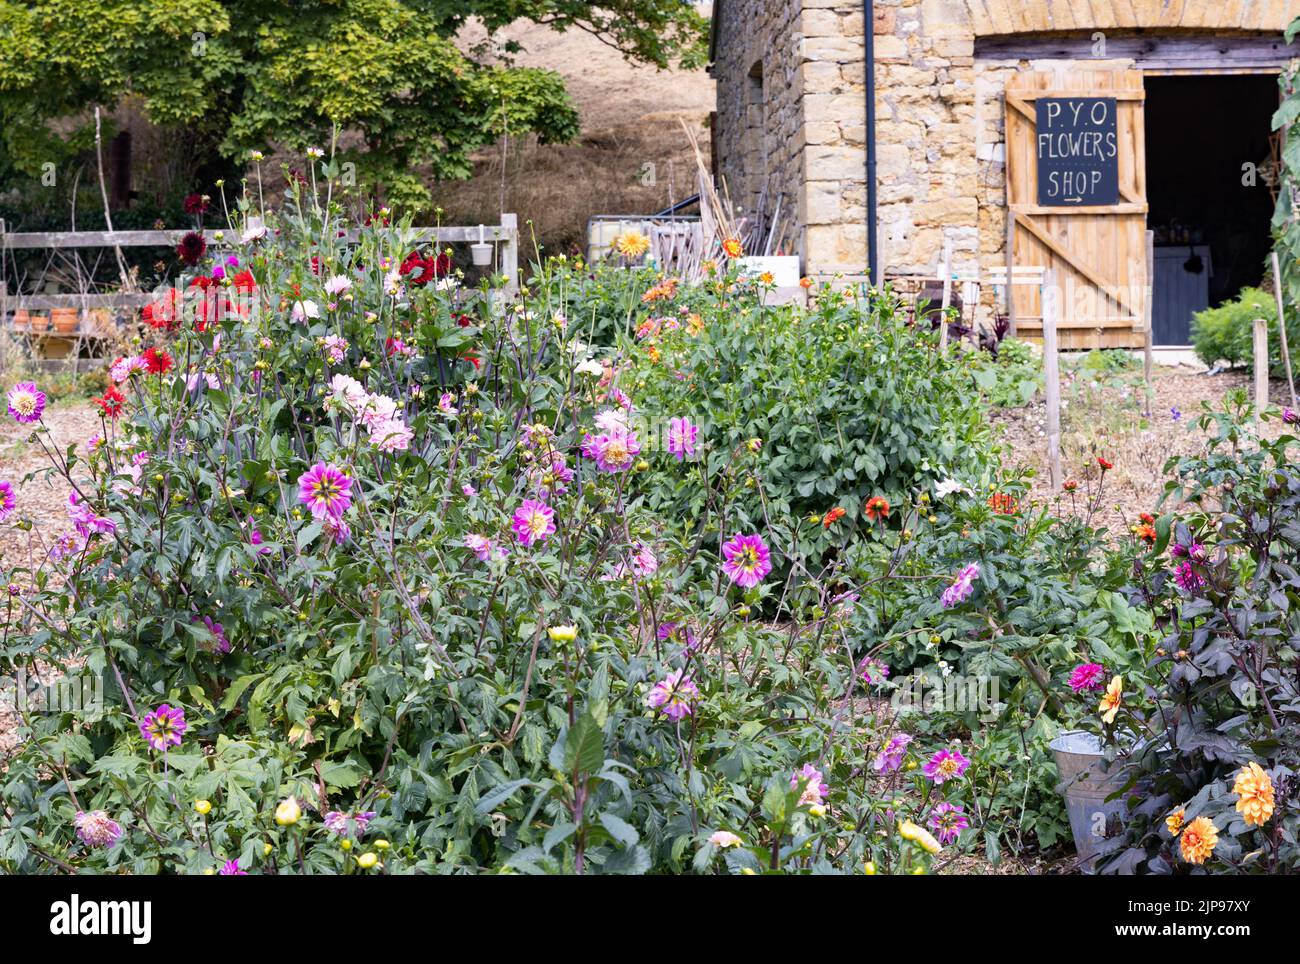 Pick your own, UK - a Pick your own flowers shop with colourful dahlias and other flowering plants, Abbotsbury, Dorset UK Stock Photo